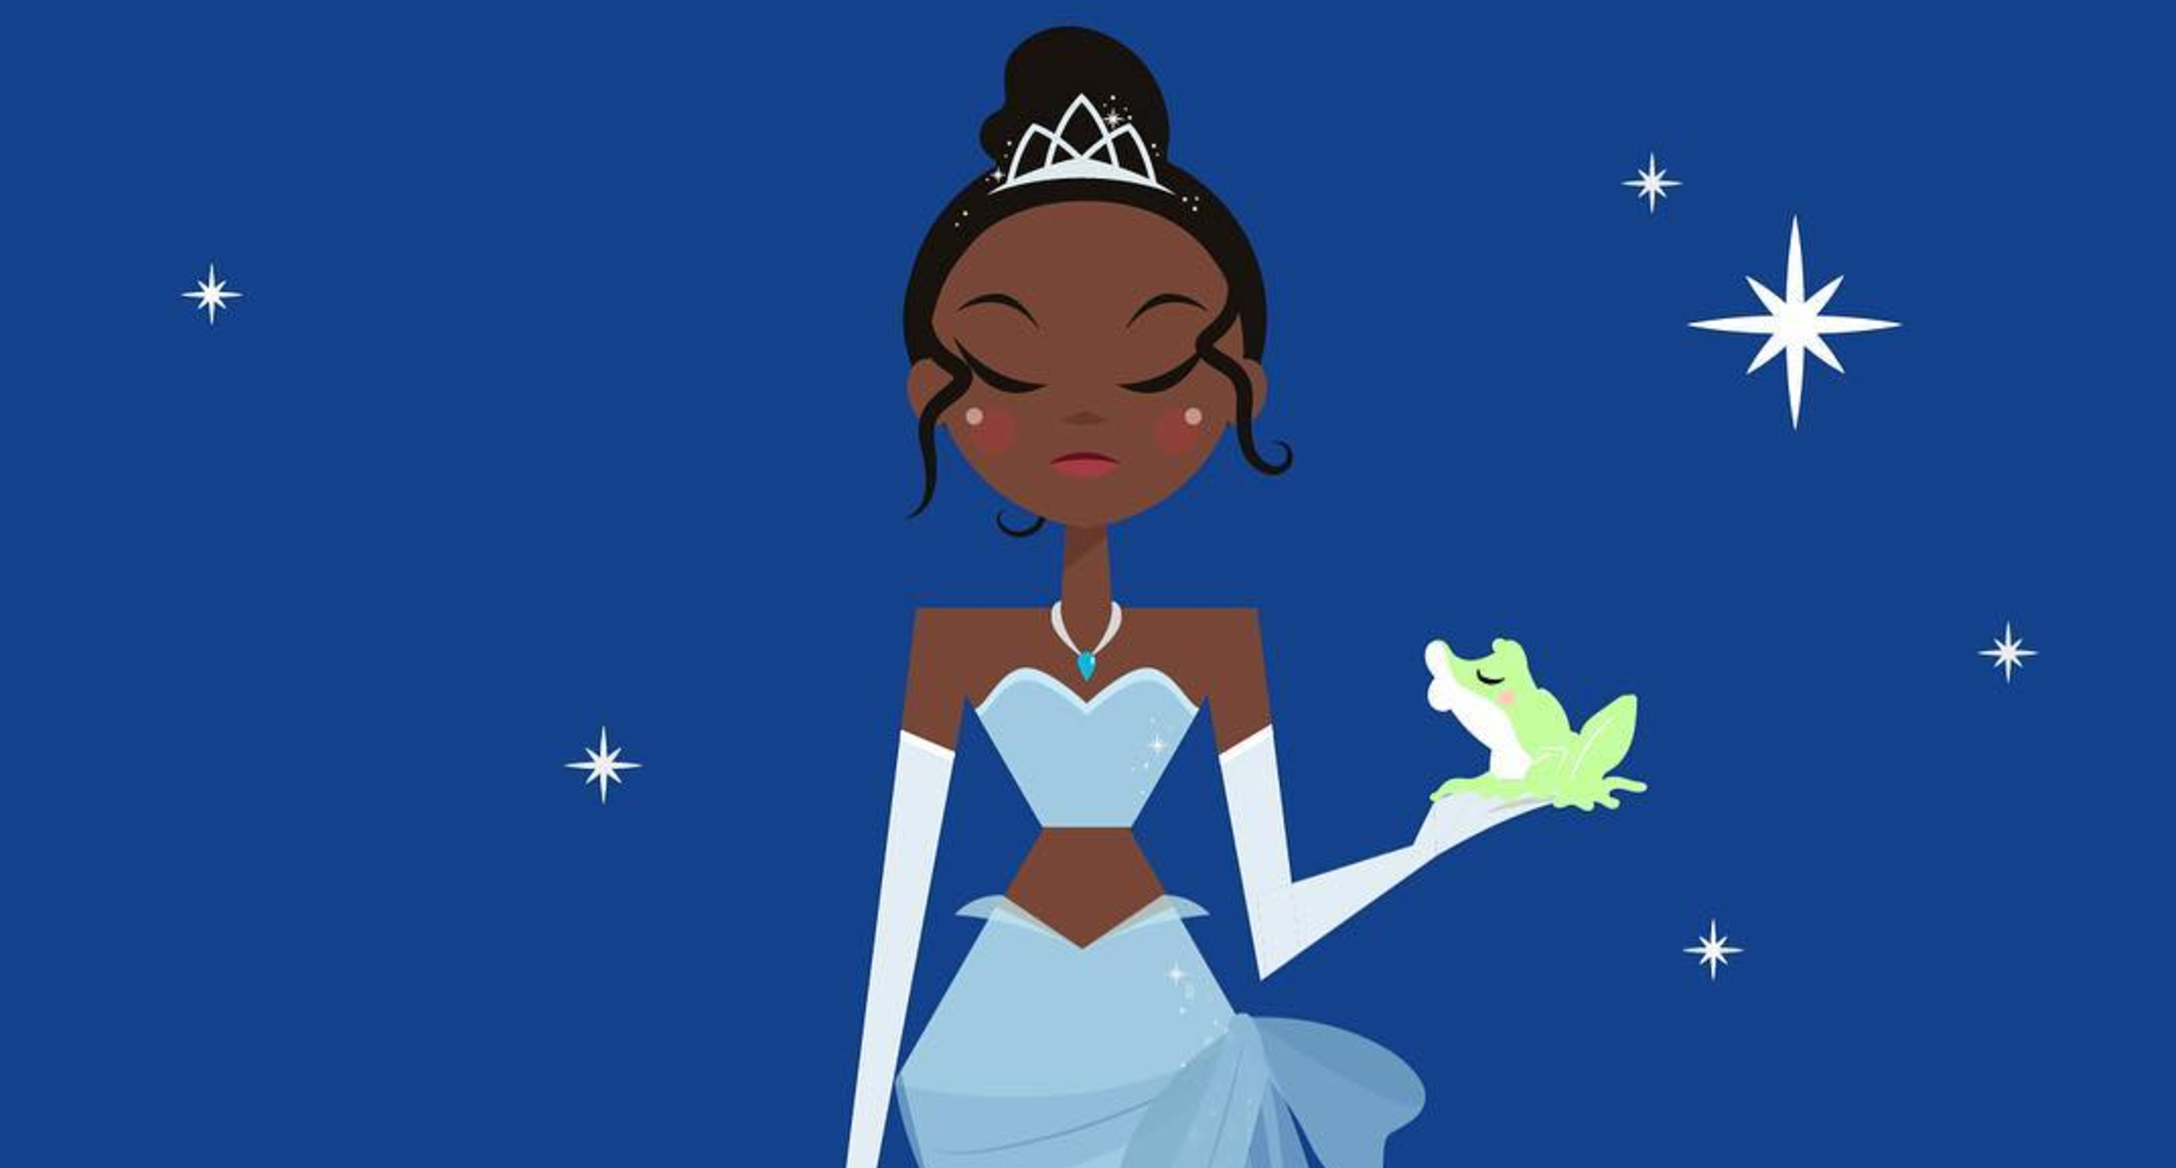 Here Are the True Meanings Behind Disney Princess Names